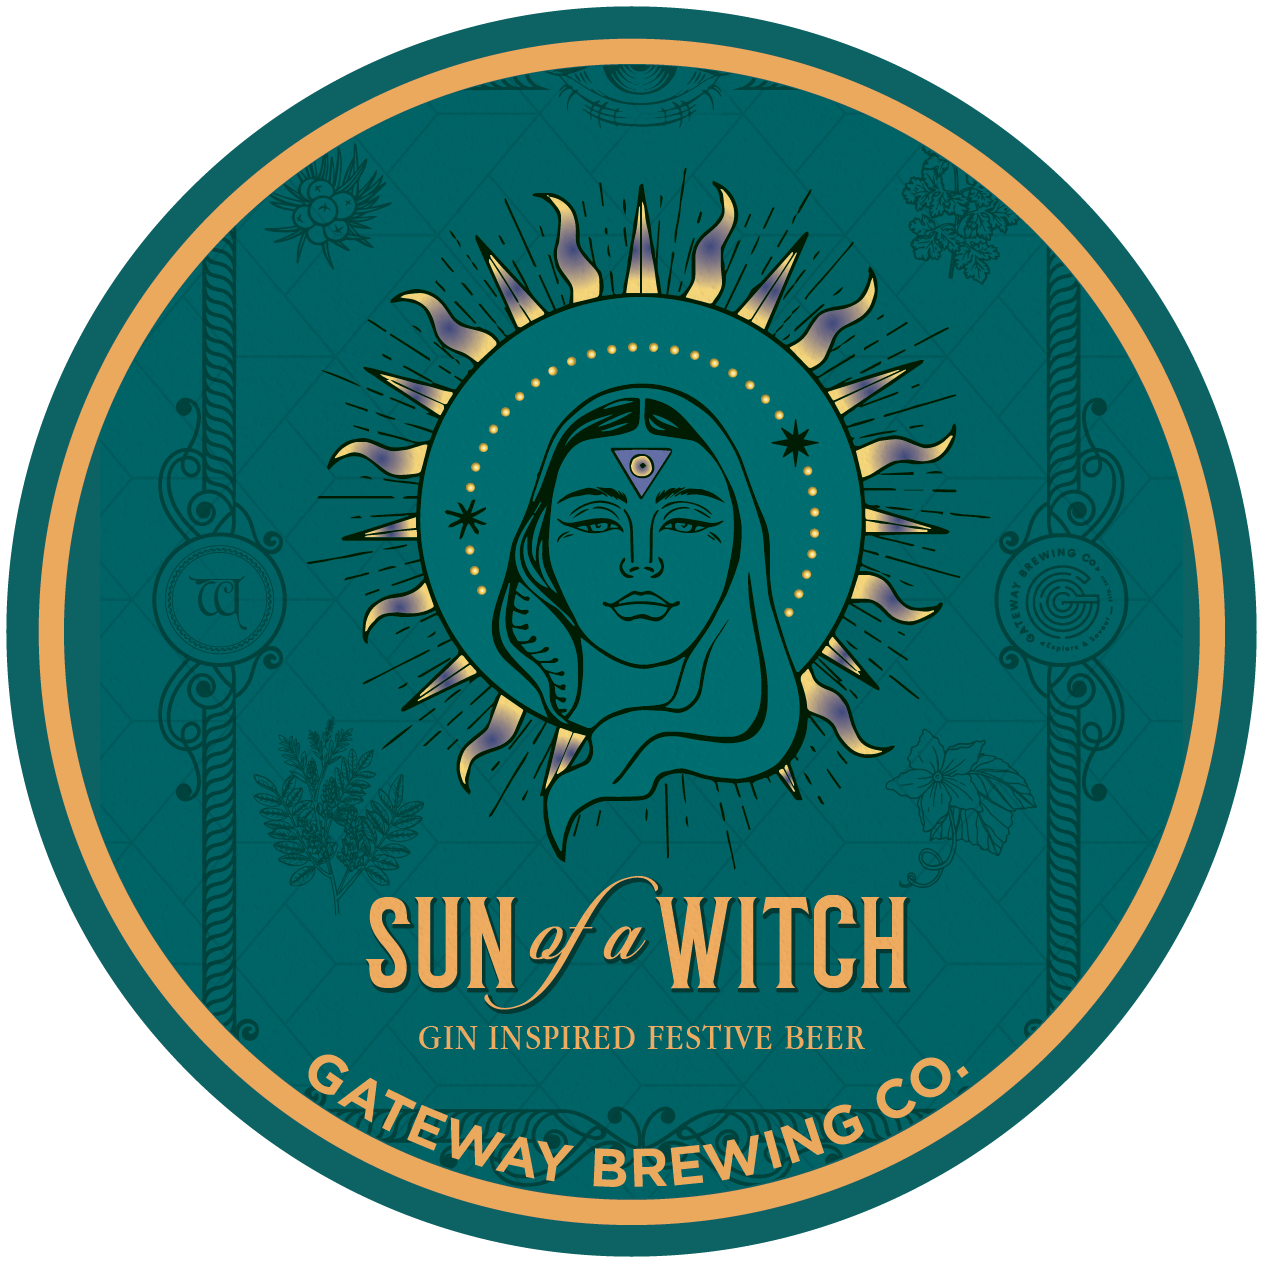 Sun of a Witch